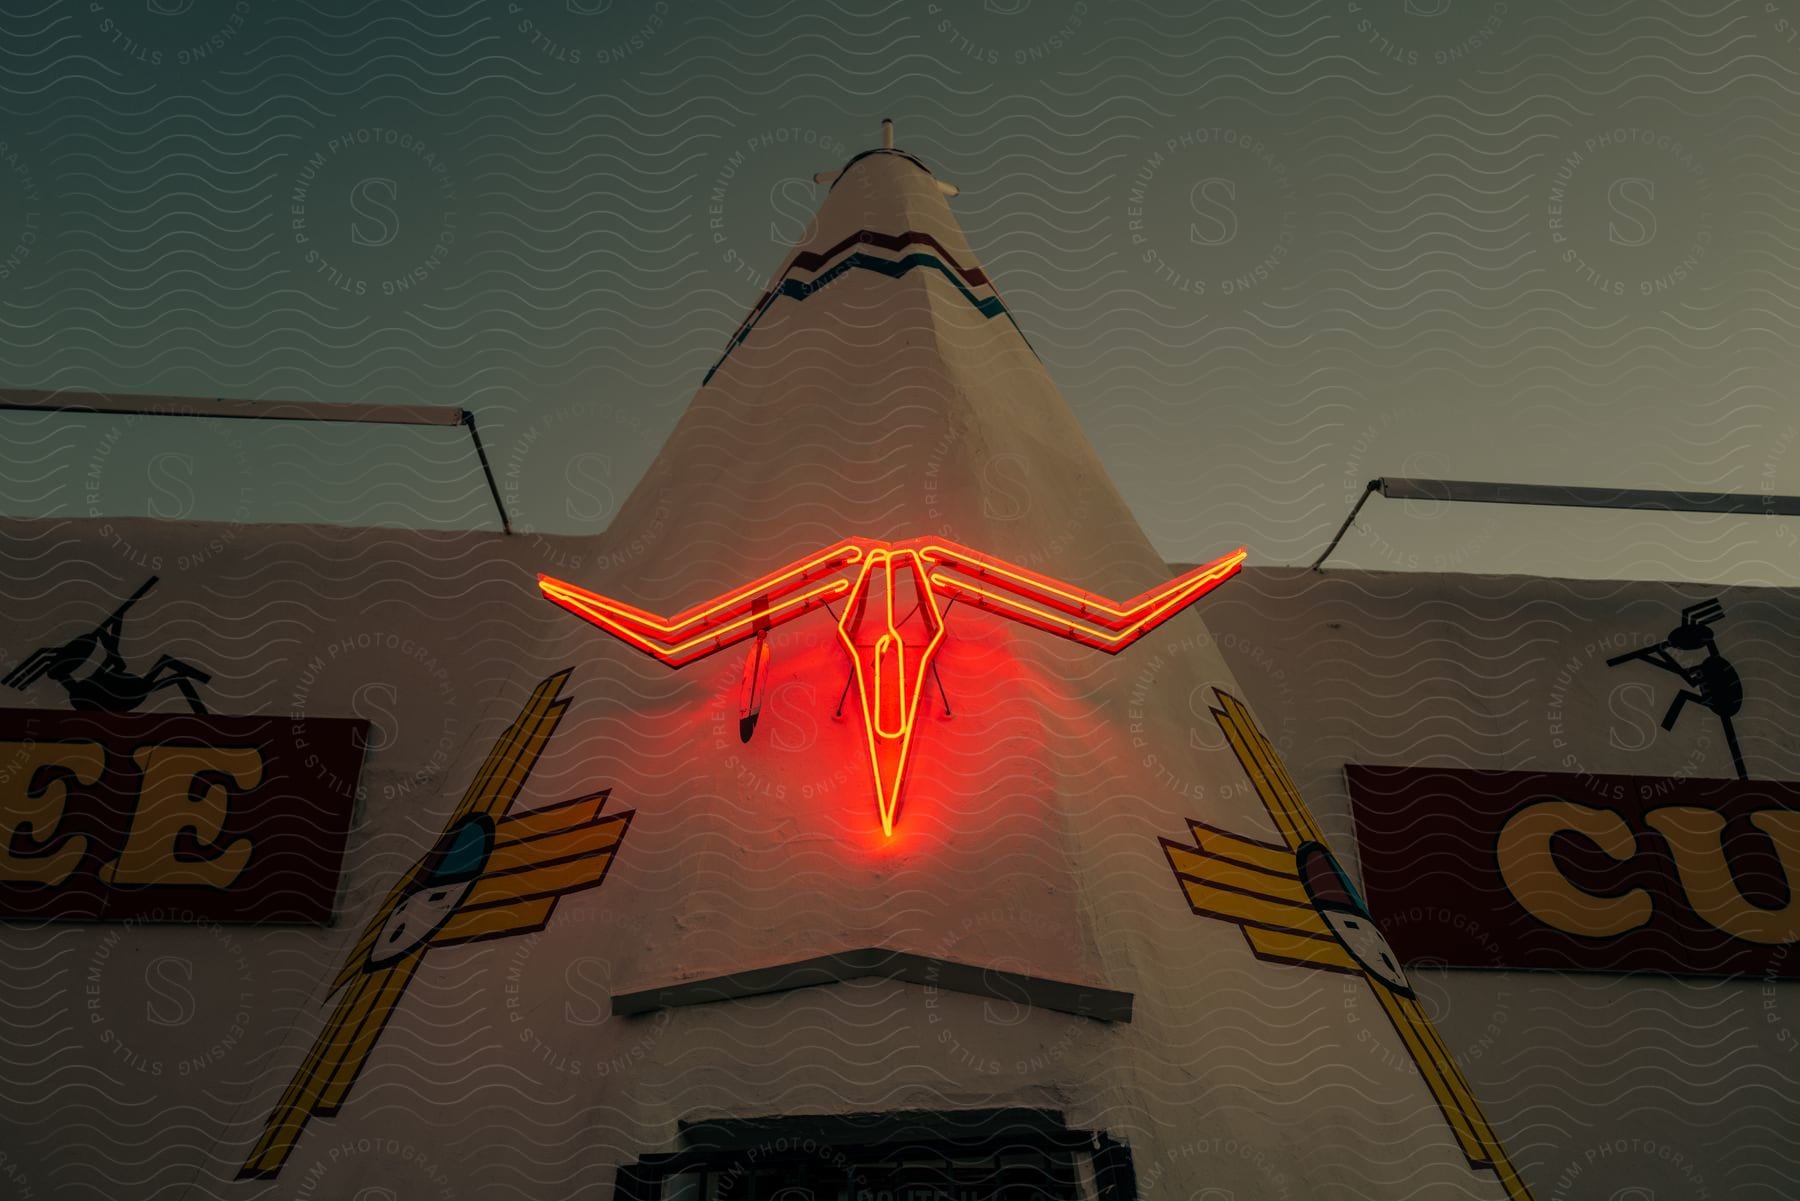 Exterior of motel with neon cow skull above the door at dusk or dawn